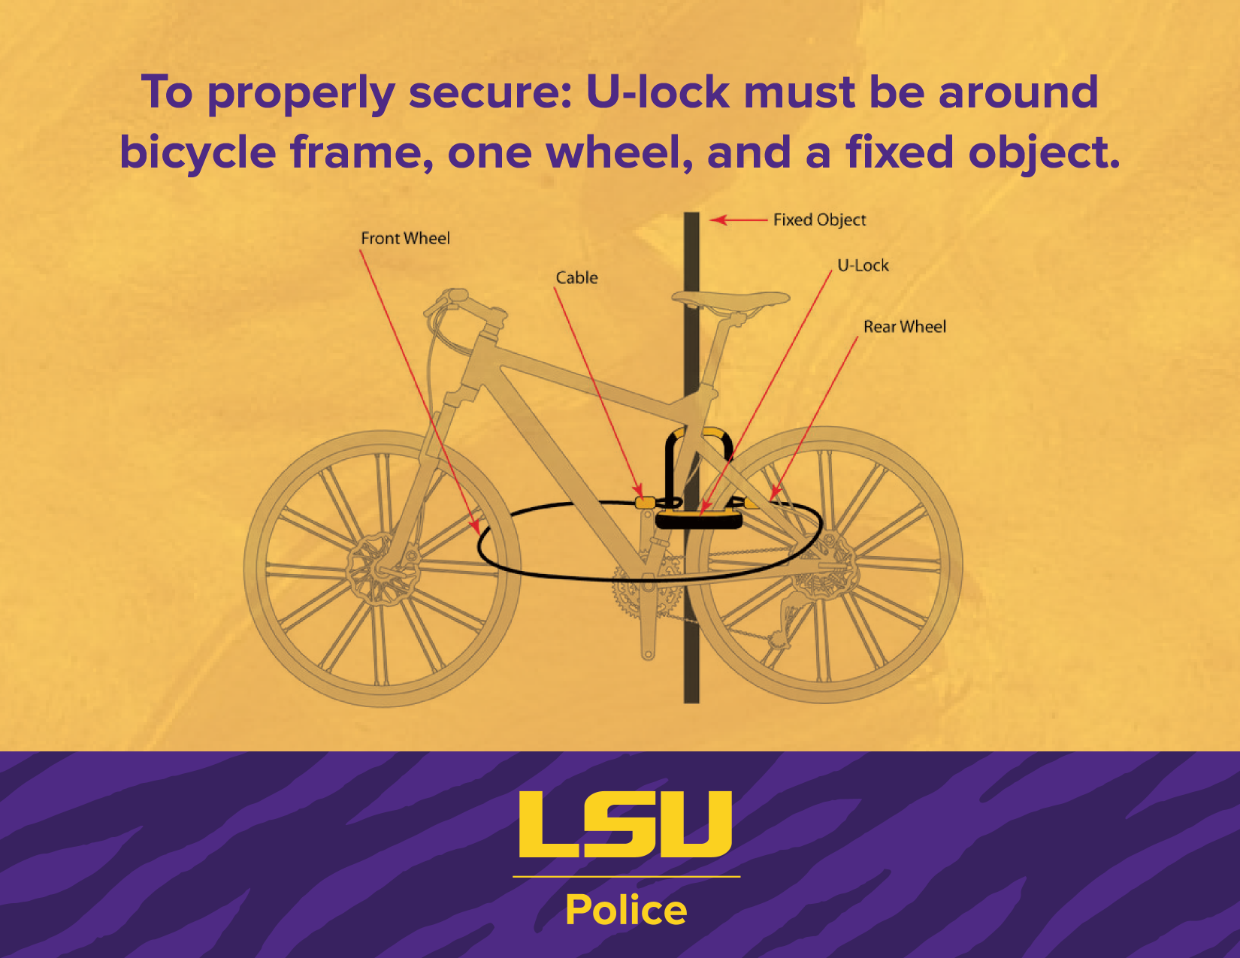 To properly secure: U-lock must be around bicycle frame, one wheel, and a fixed object.